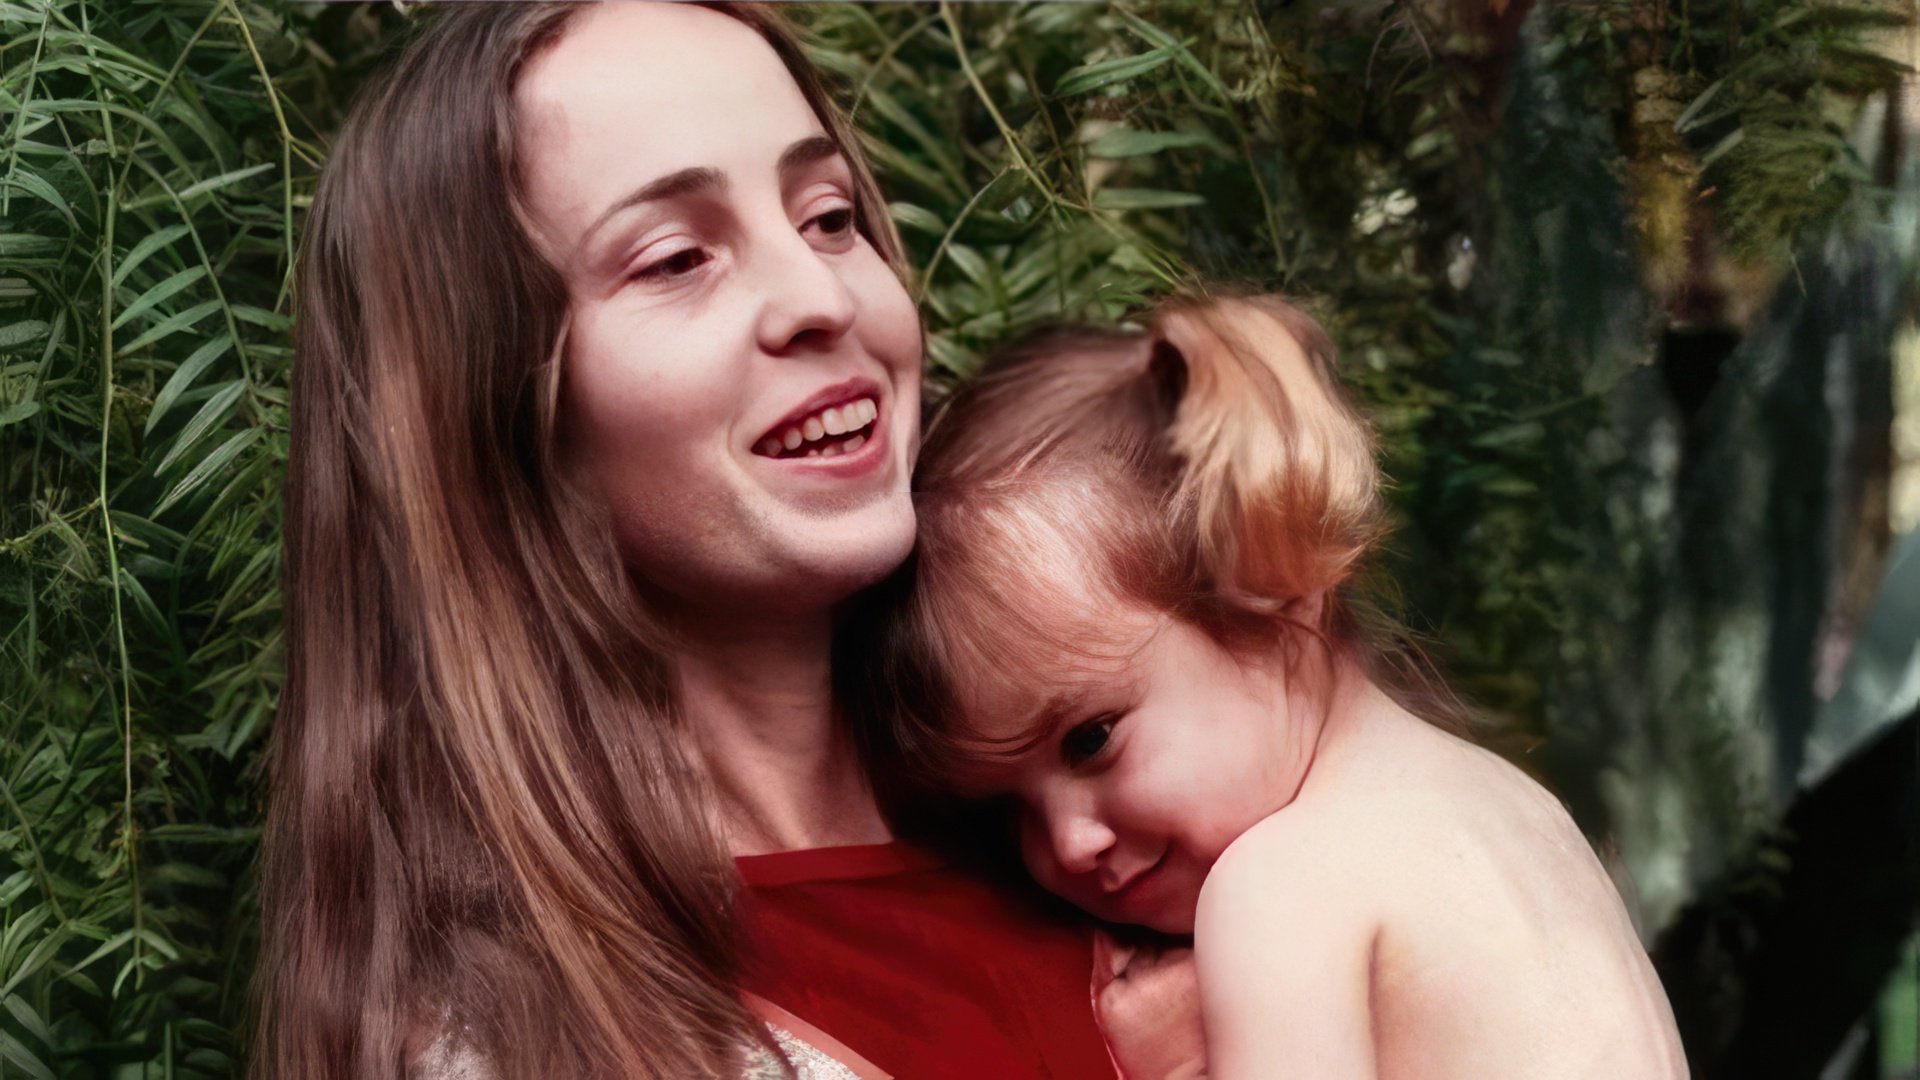 Steve Jobs' first love was Chrisann Brennan (in the photo with her daughter)